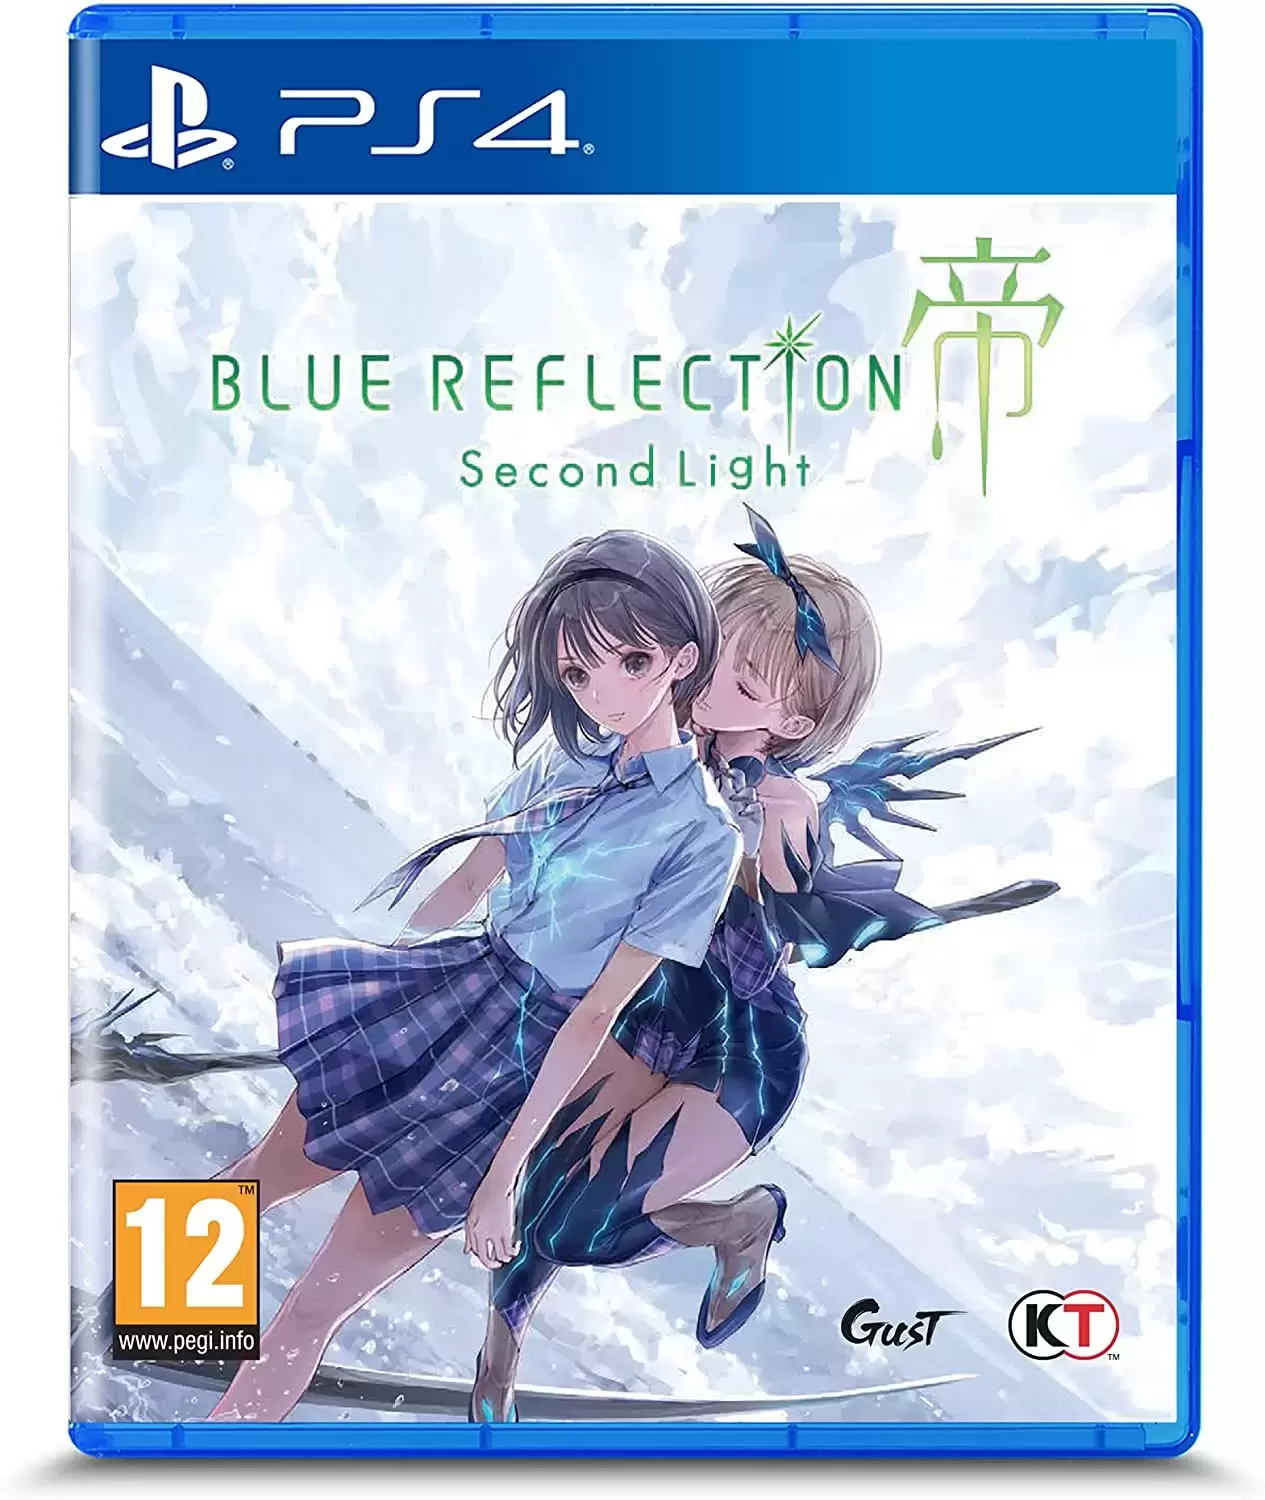 PS4 Games - Blue Reflection Second Light